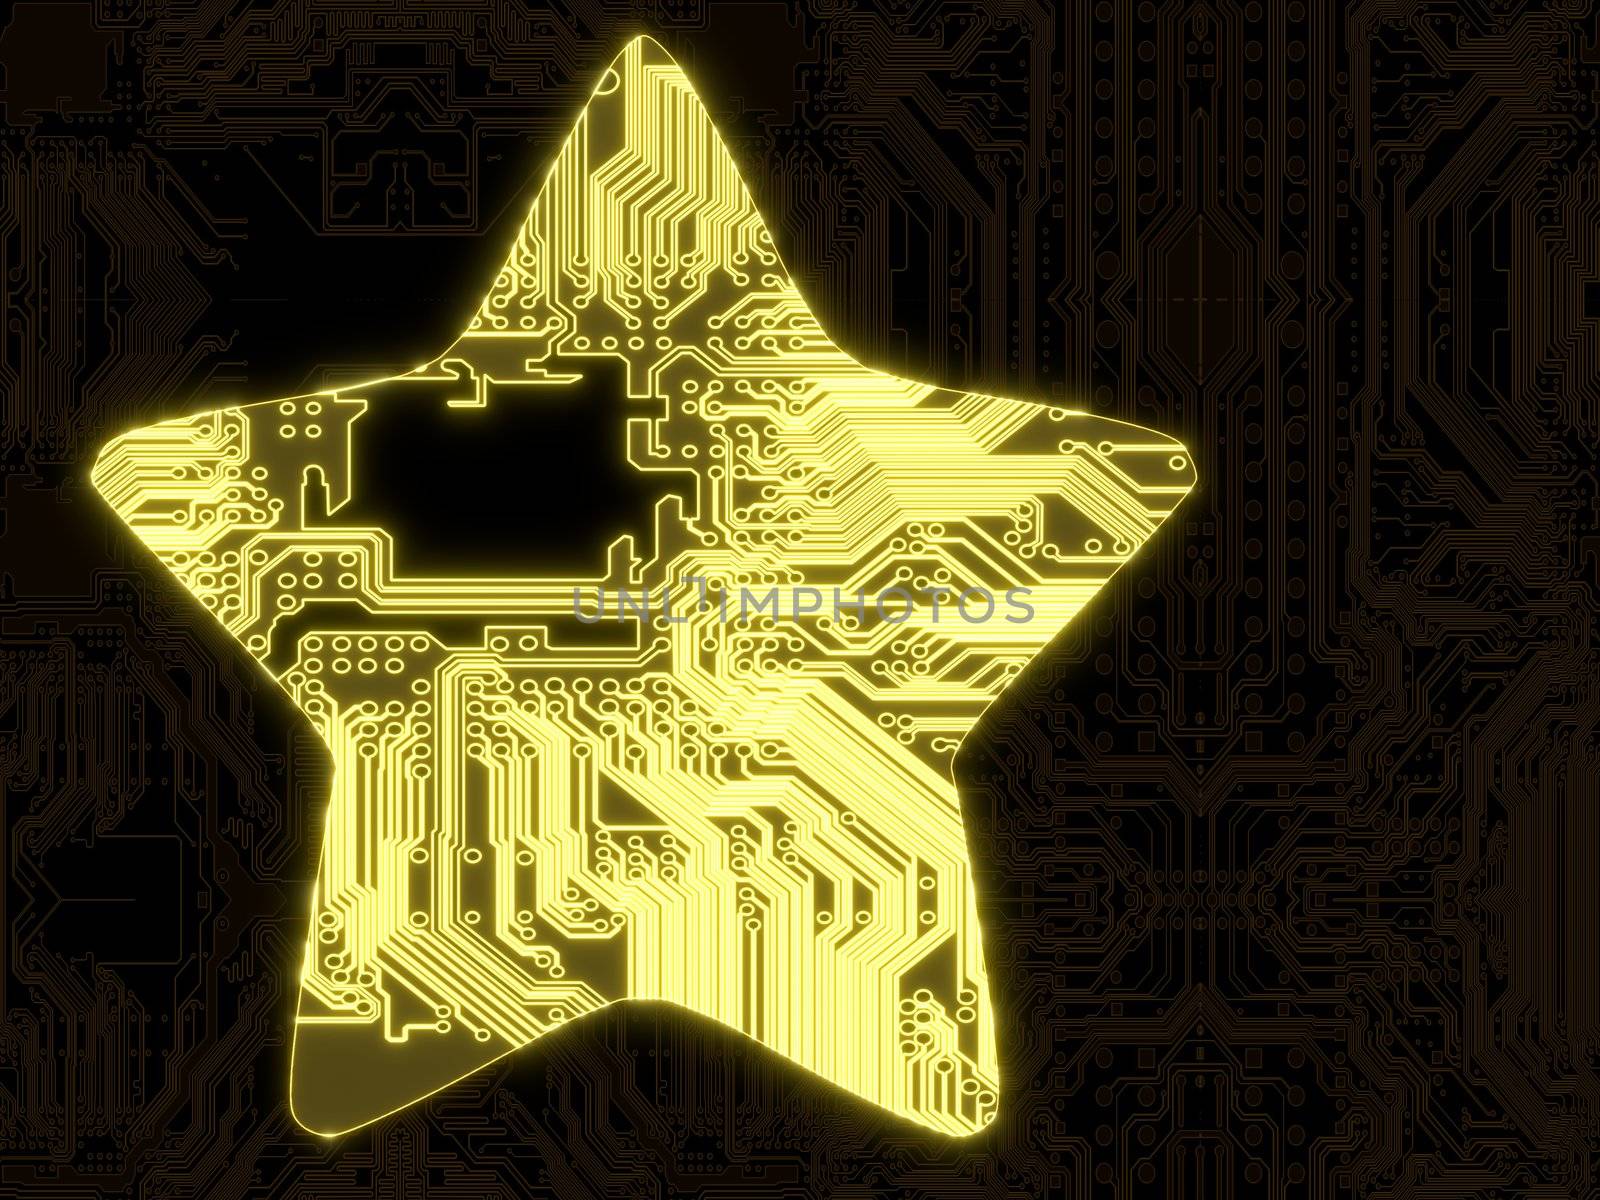 3D Graphic flare computer star symbol on a computer chip